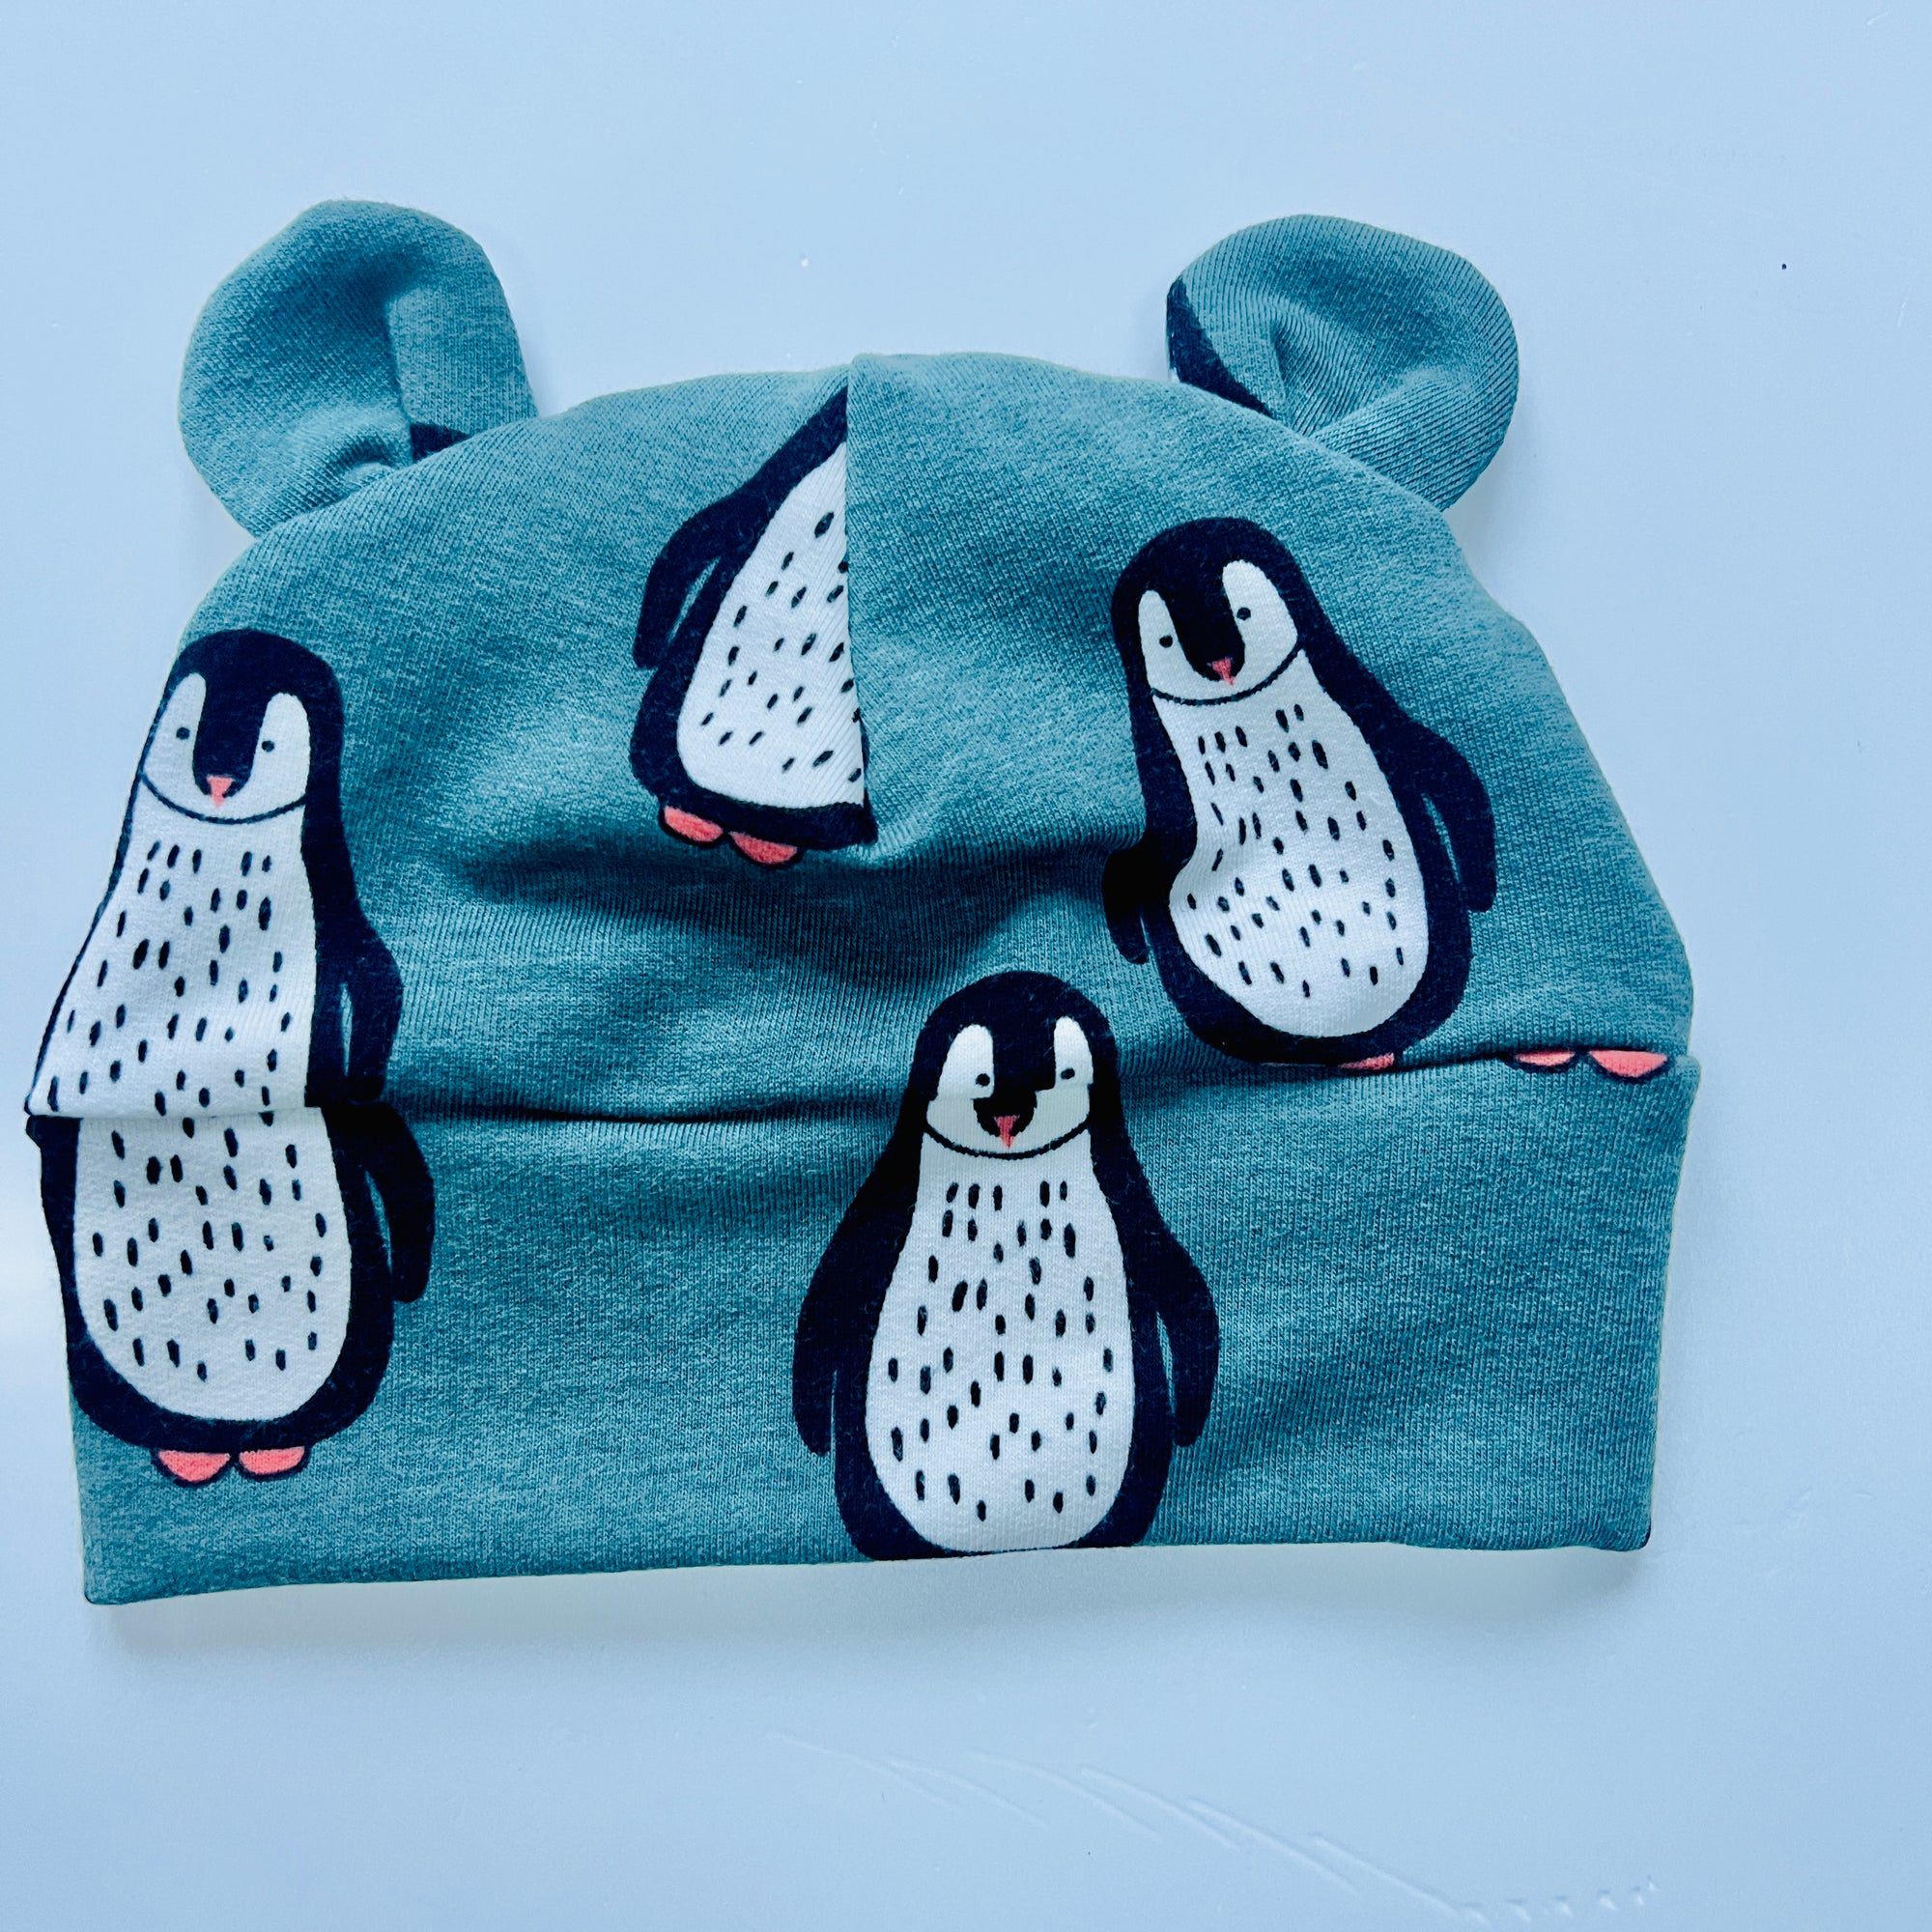 Eddie & Bee organic cotton Baby hat with ears  in Teal "Penguin" print. I